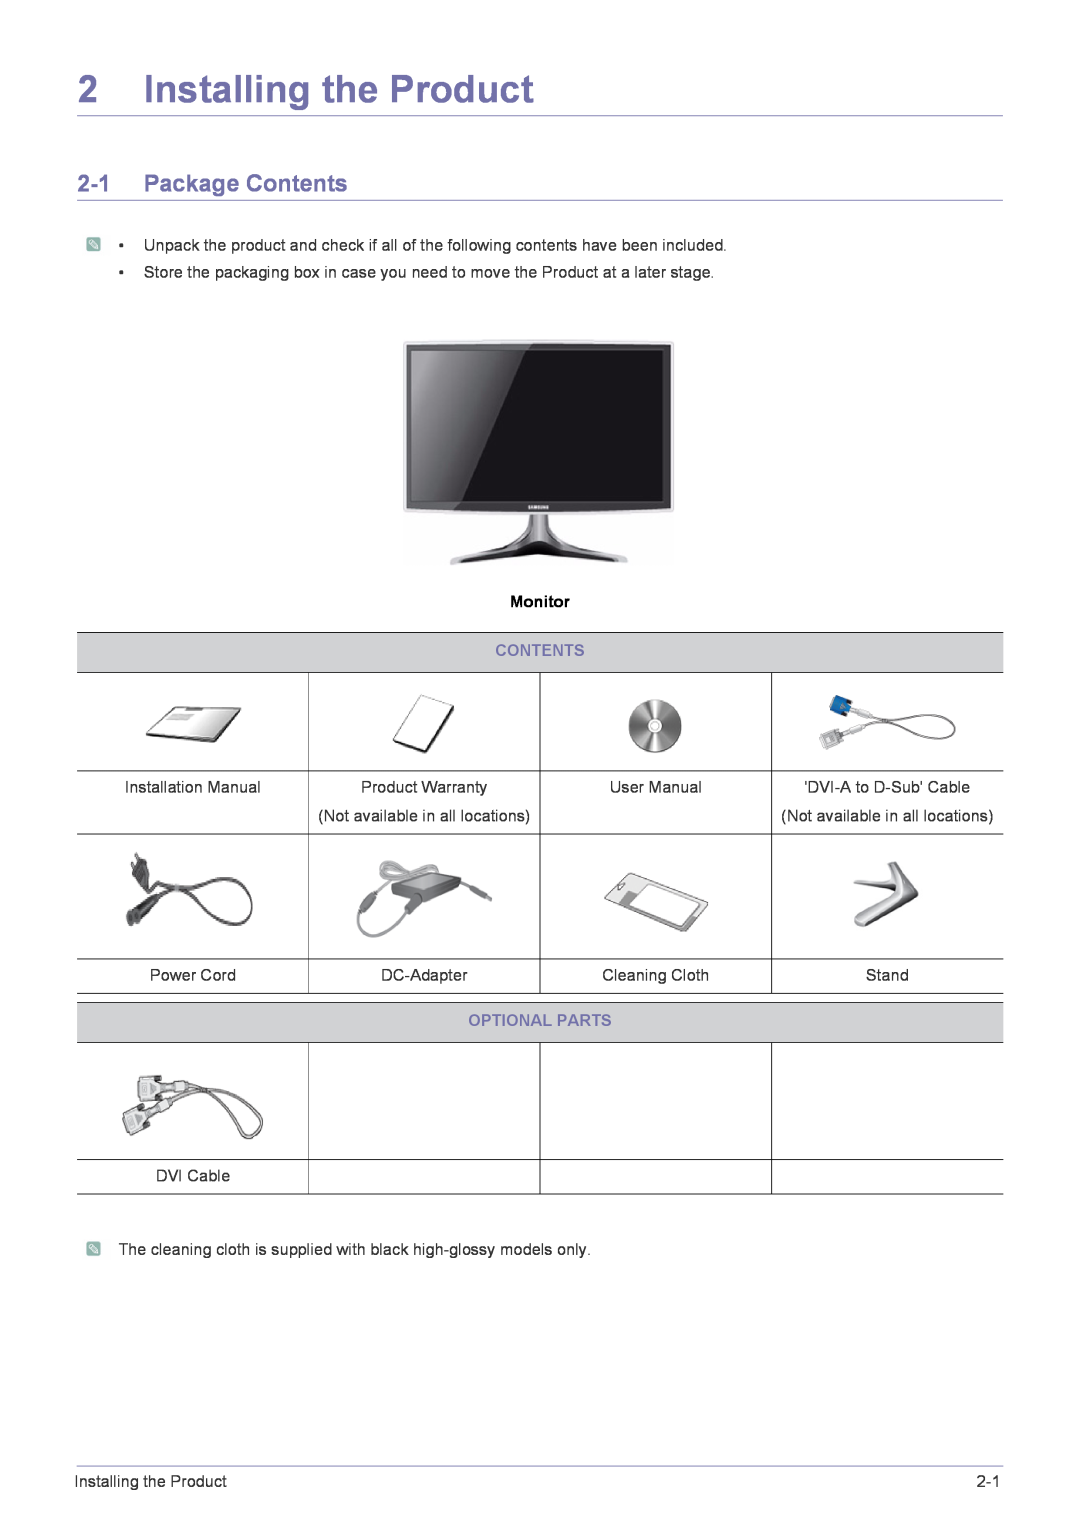 Samsung BX2035 user manual Installing the Product, Package Contents, Optional Parts, Monitor 